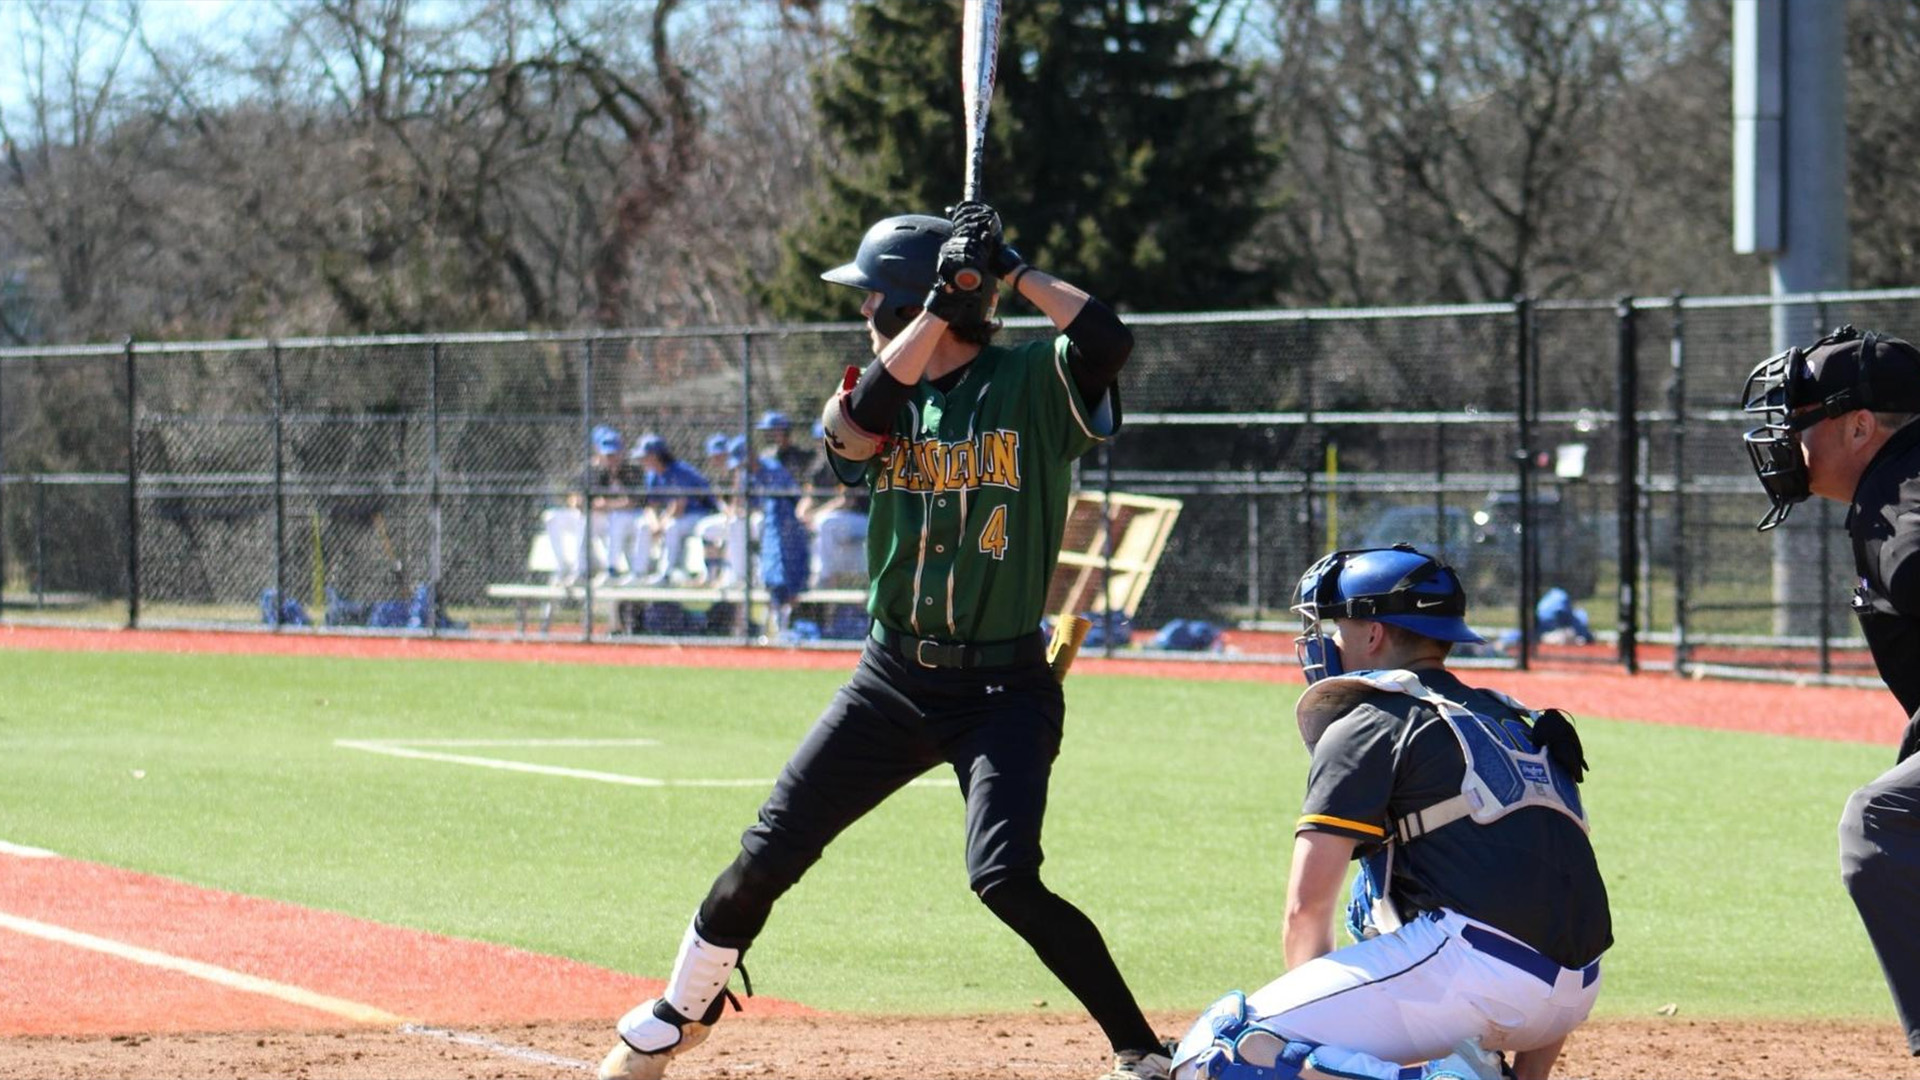 Felician Sweeps Caldwell to Advance in CACC Baseball Championship Tournament